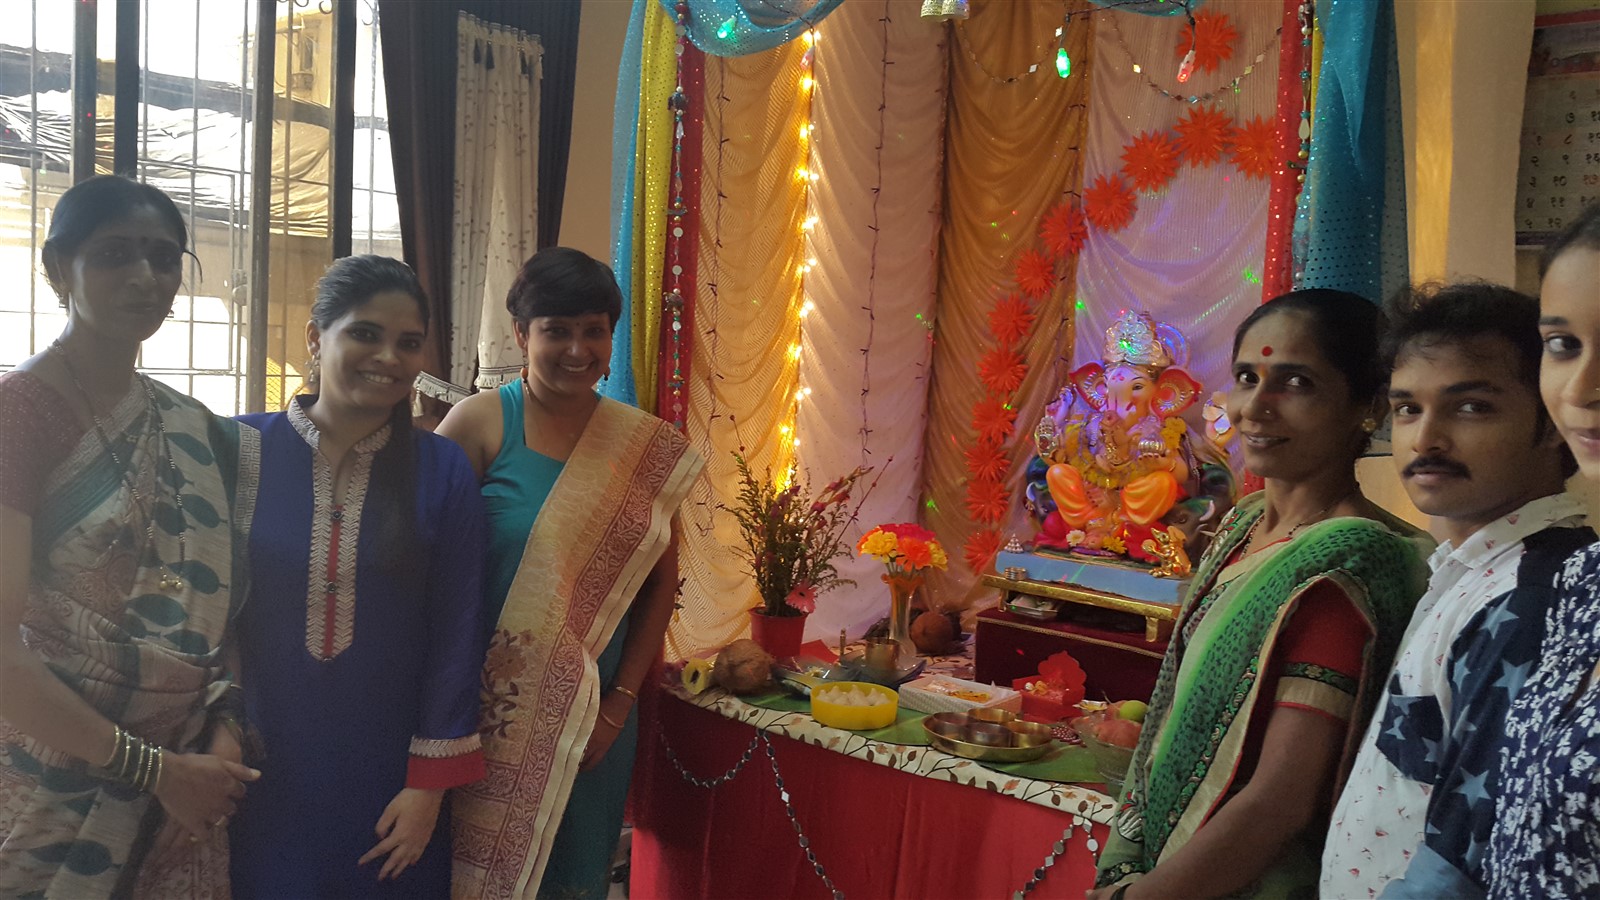 Ganesh Festival is one of the most popular festivals amongst the beneficiaries